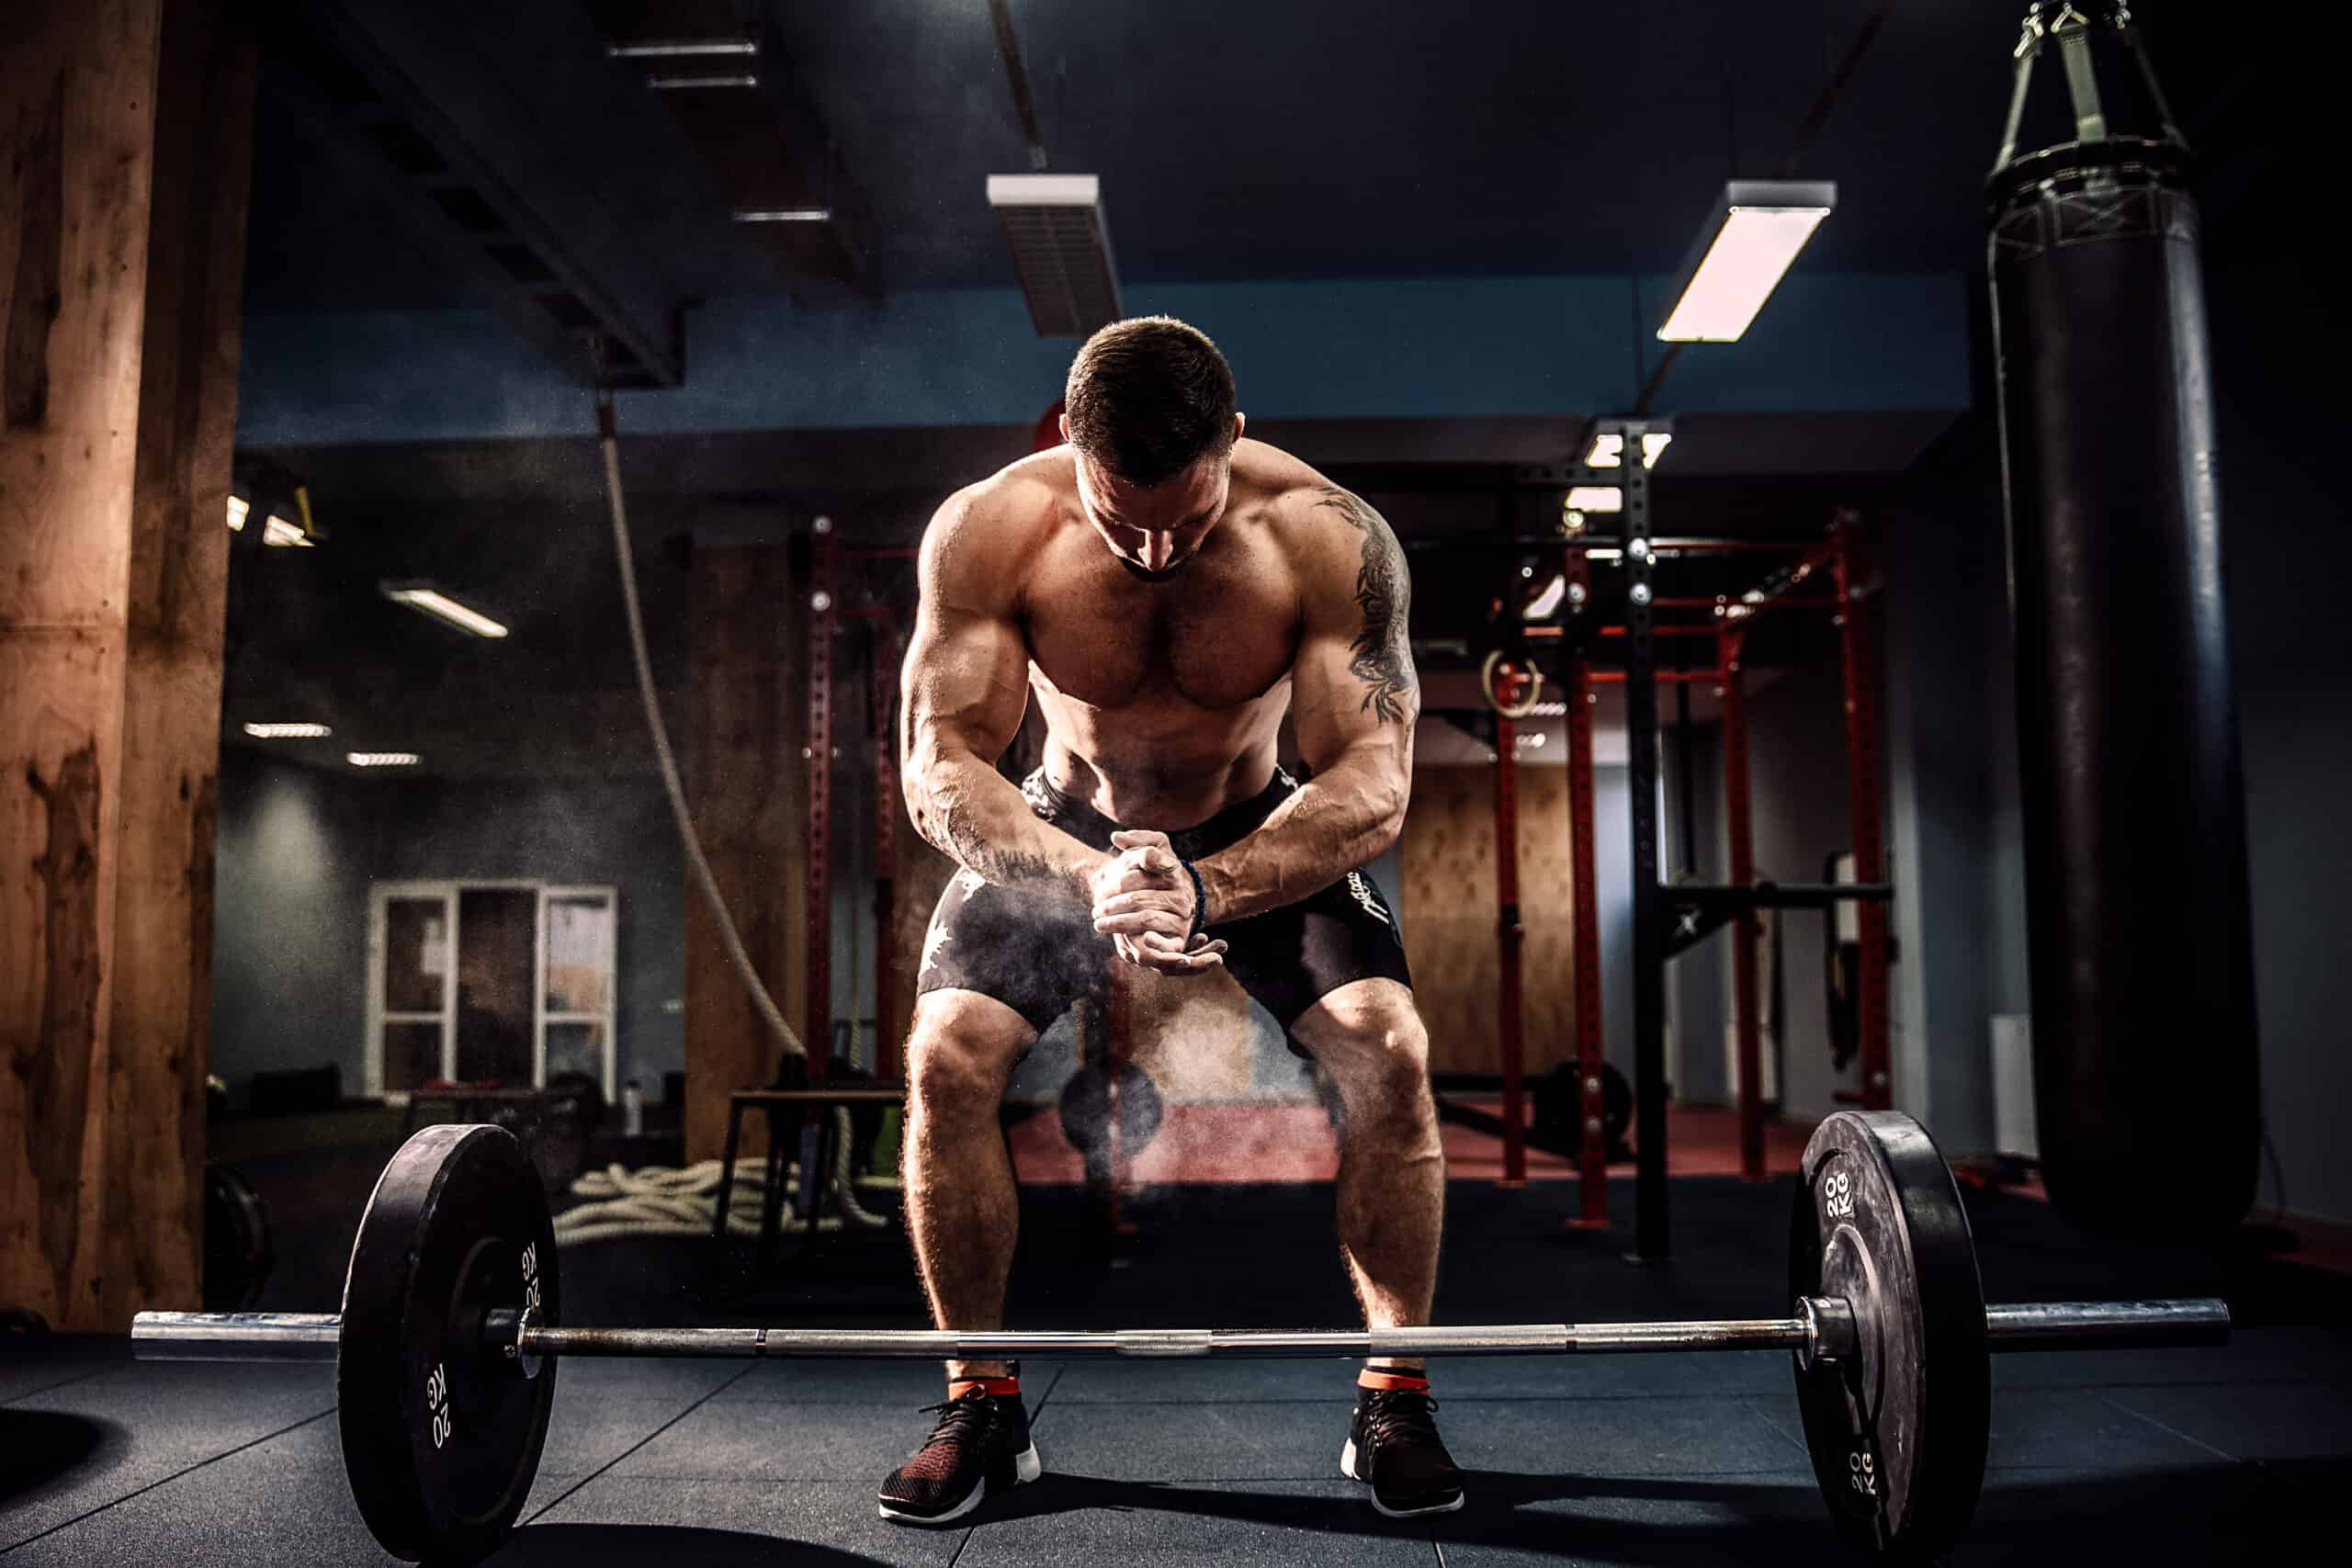 One of Best Full Body Exercises You Need to Do is the Deadlift